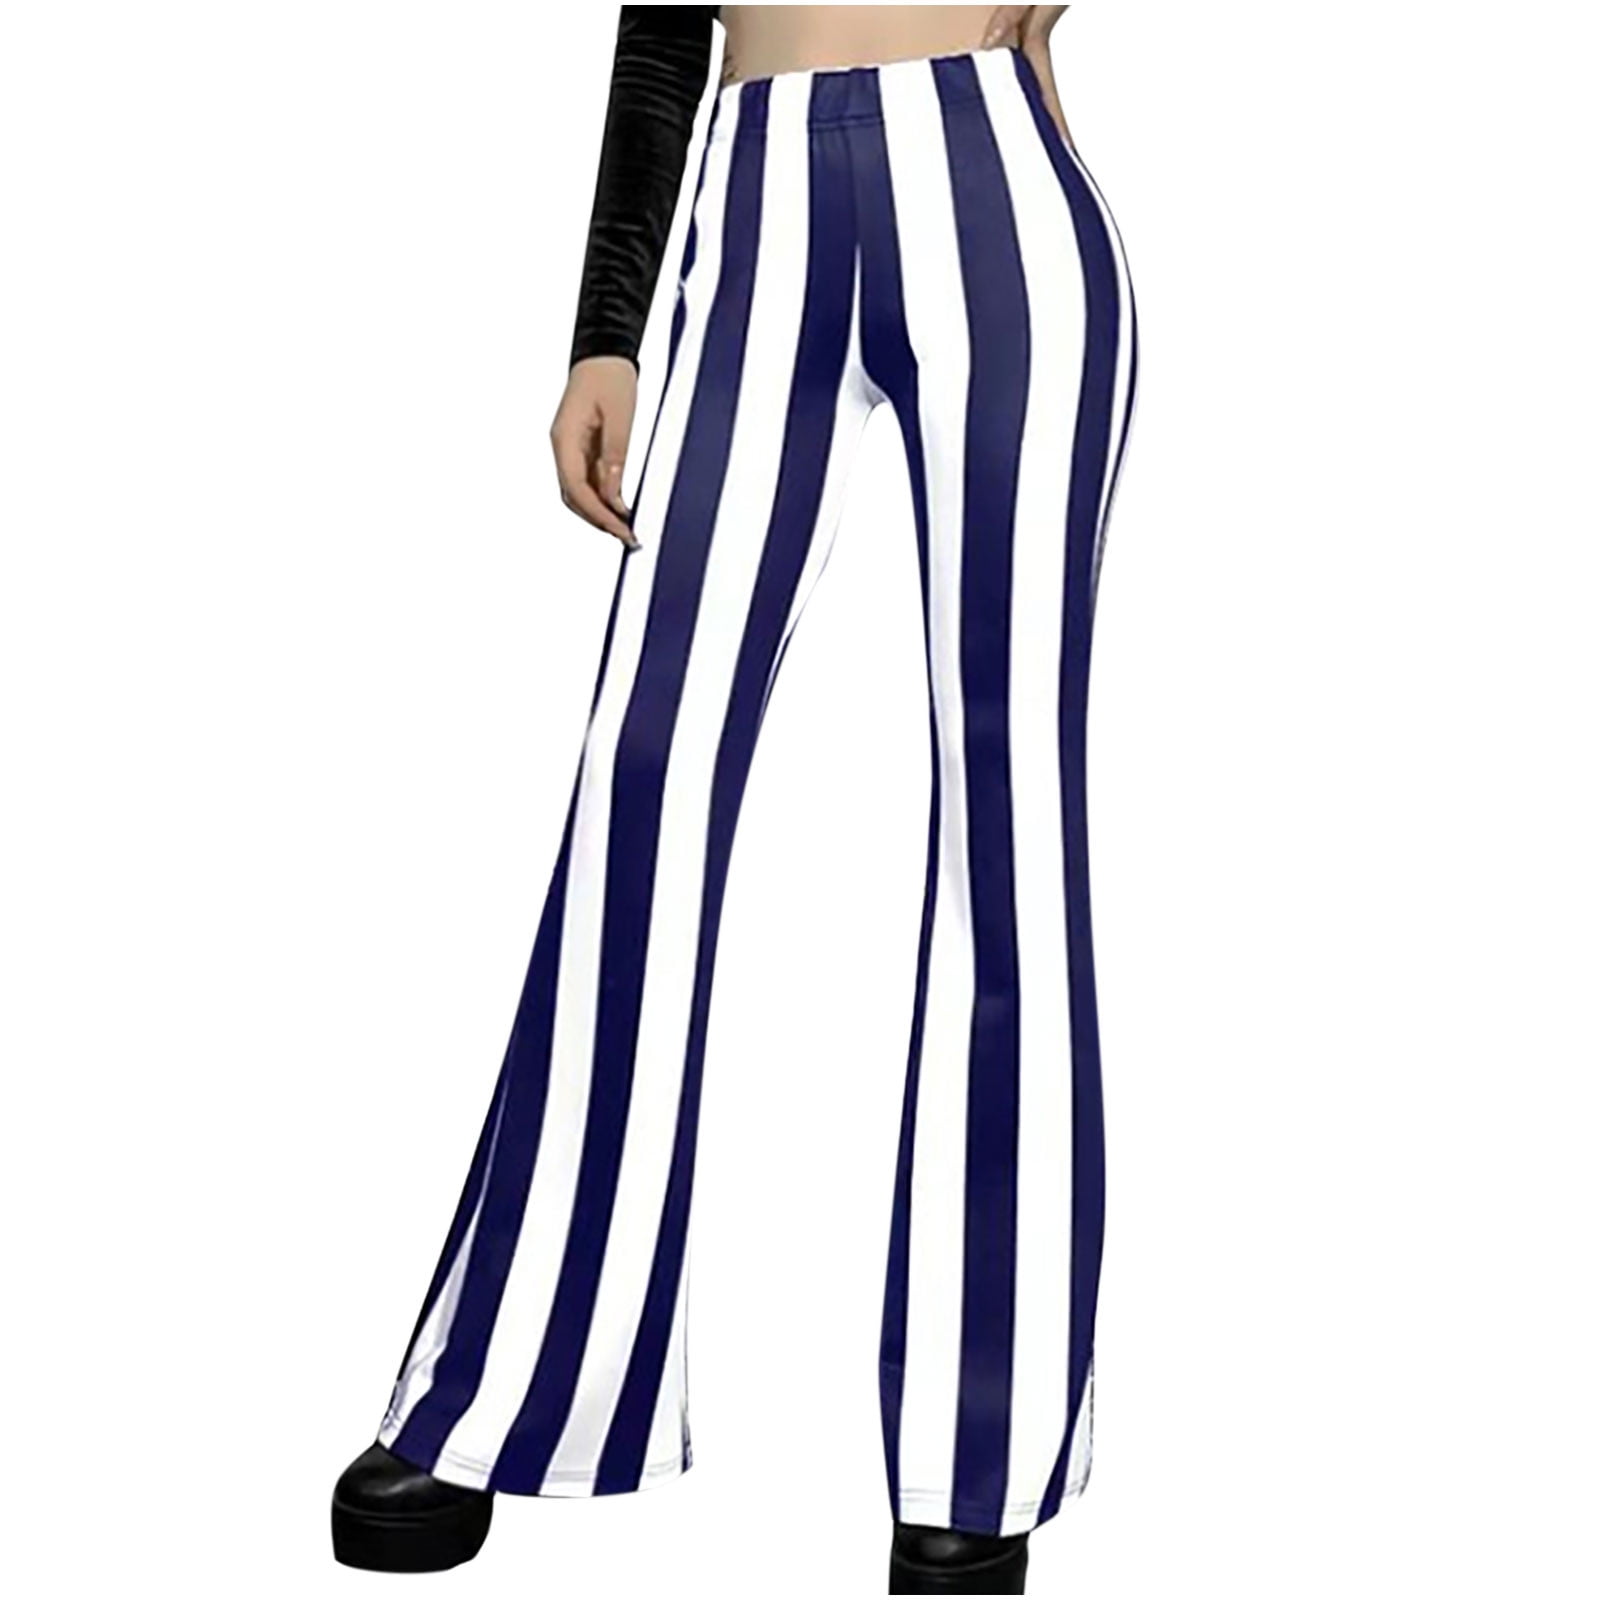 JWZUY Womens Bell Bottom Bootcut Pants Vintage Striped Print Flare